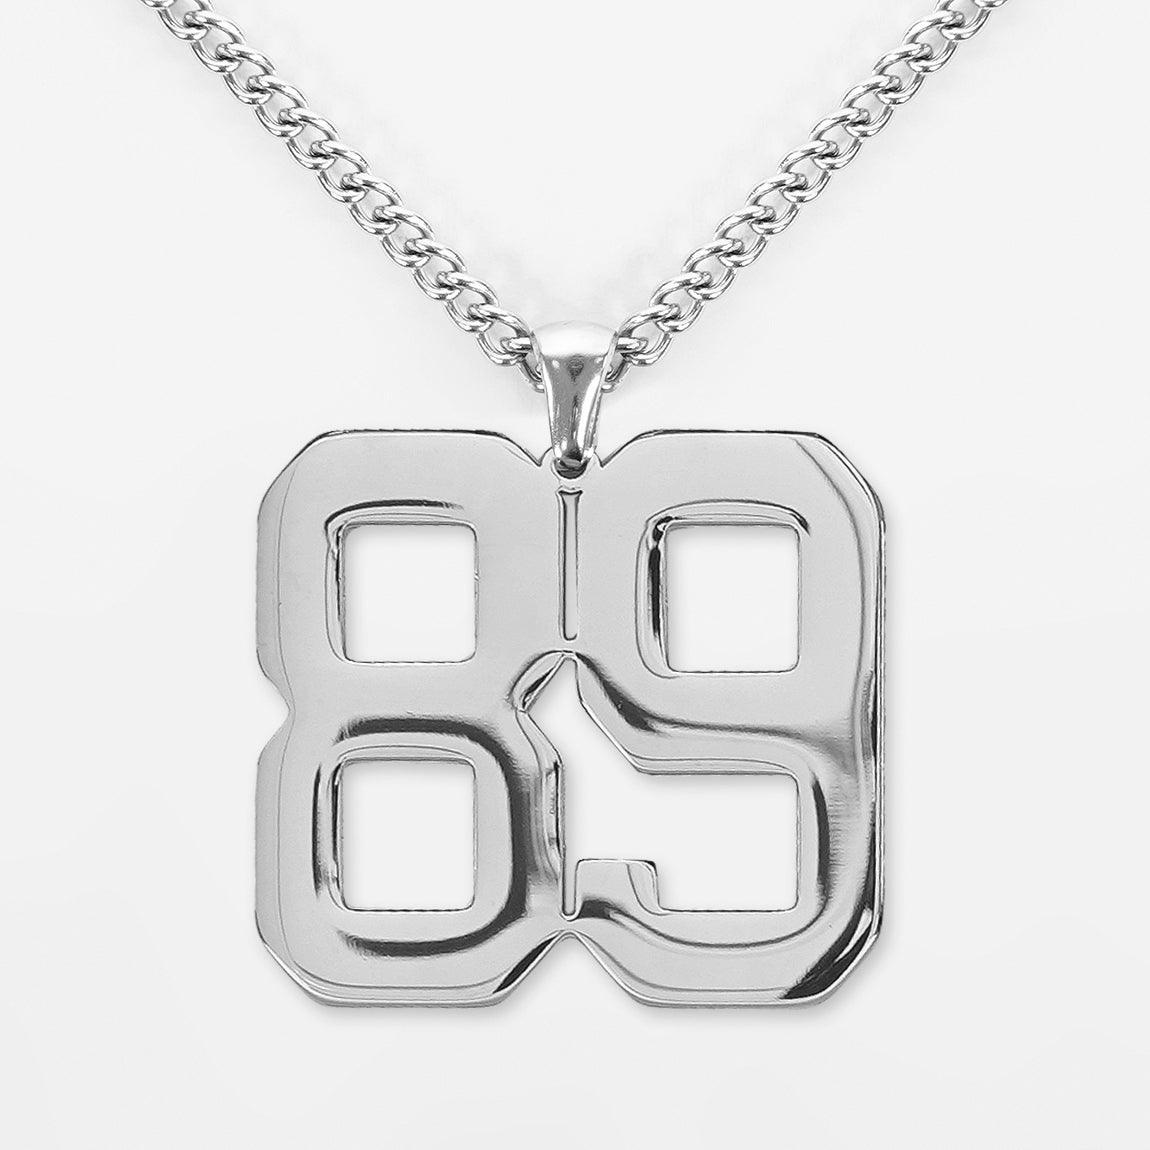 89 Number Pendant with Chain Necklace - Stainless Steel